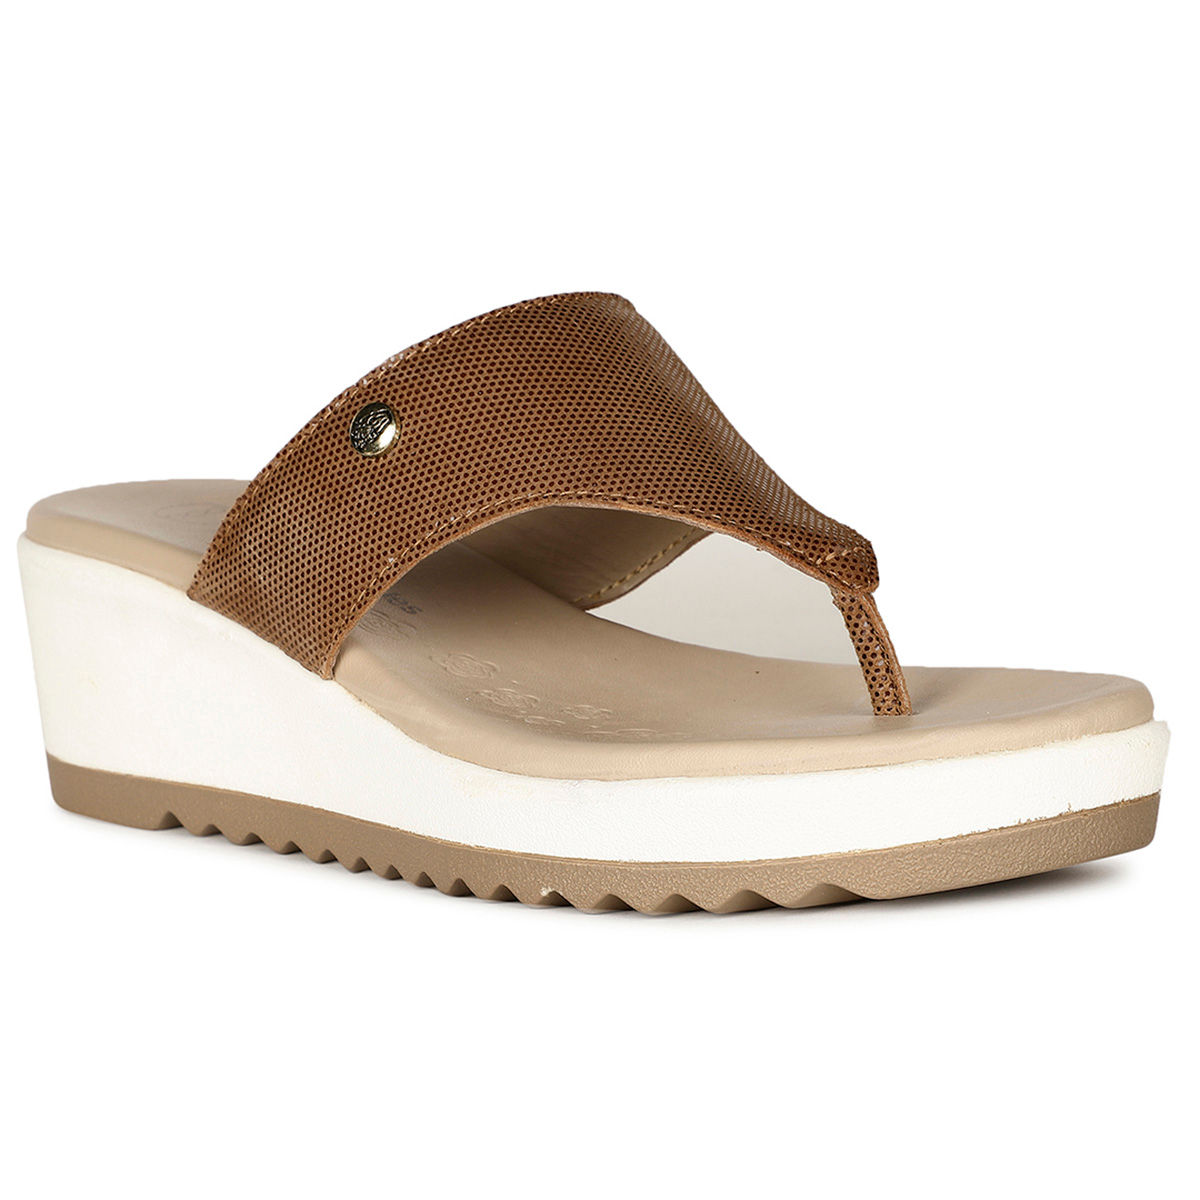 Buy Hush Puppies Women Casual Sandals Breathe Slingbac - 3 UK at Amazon.in